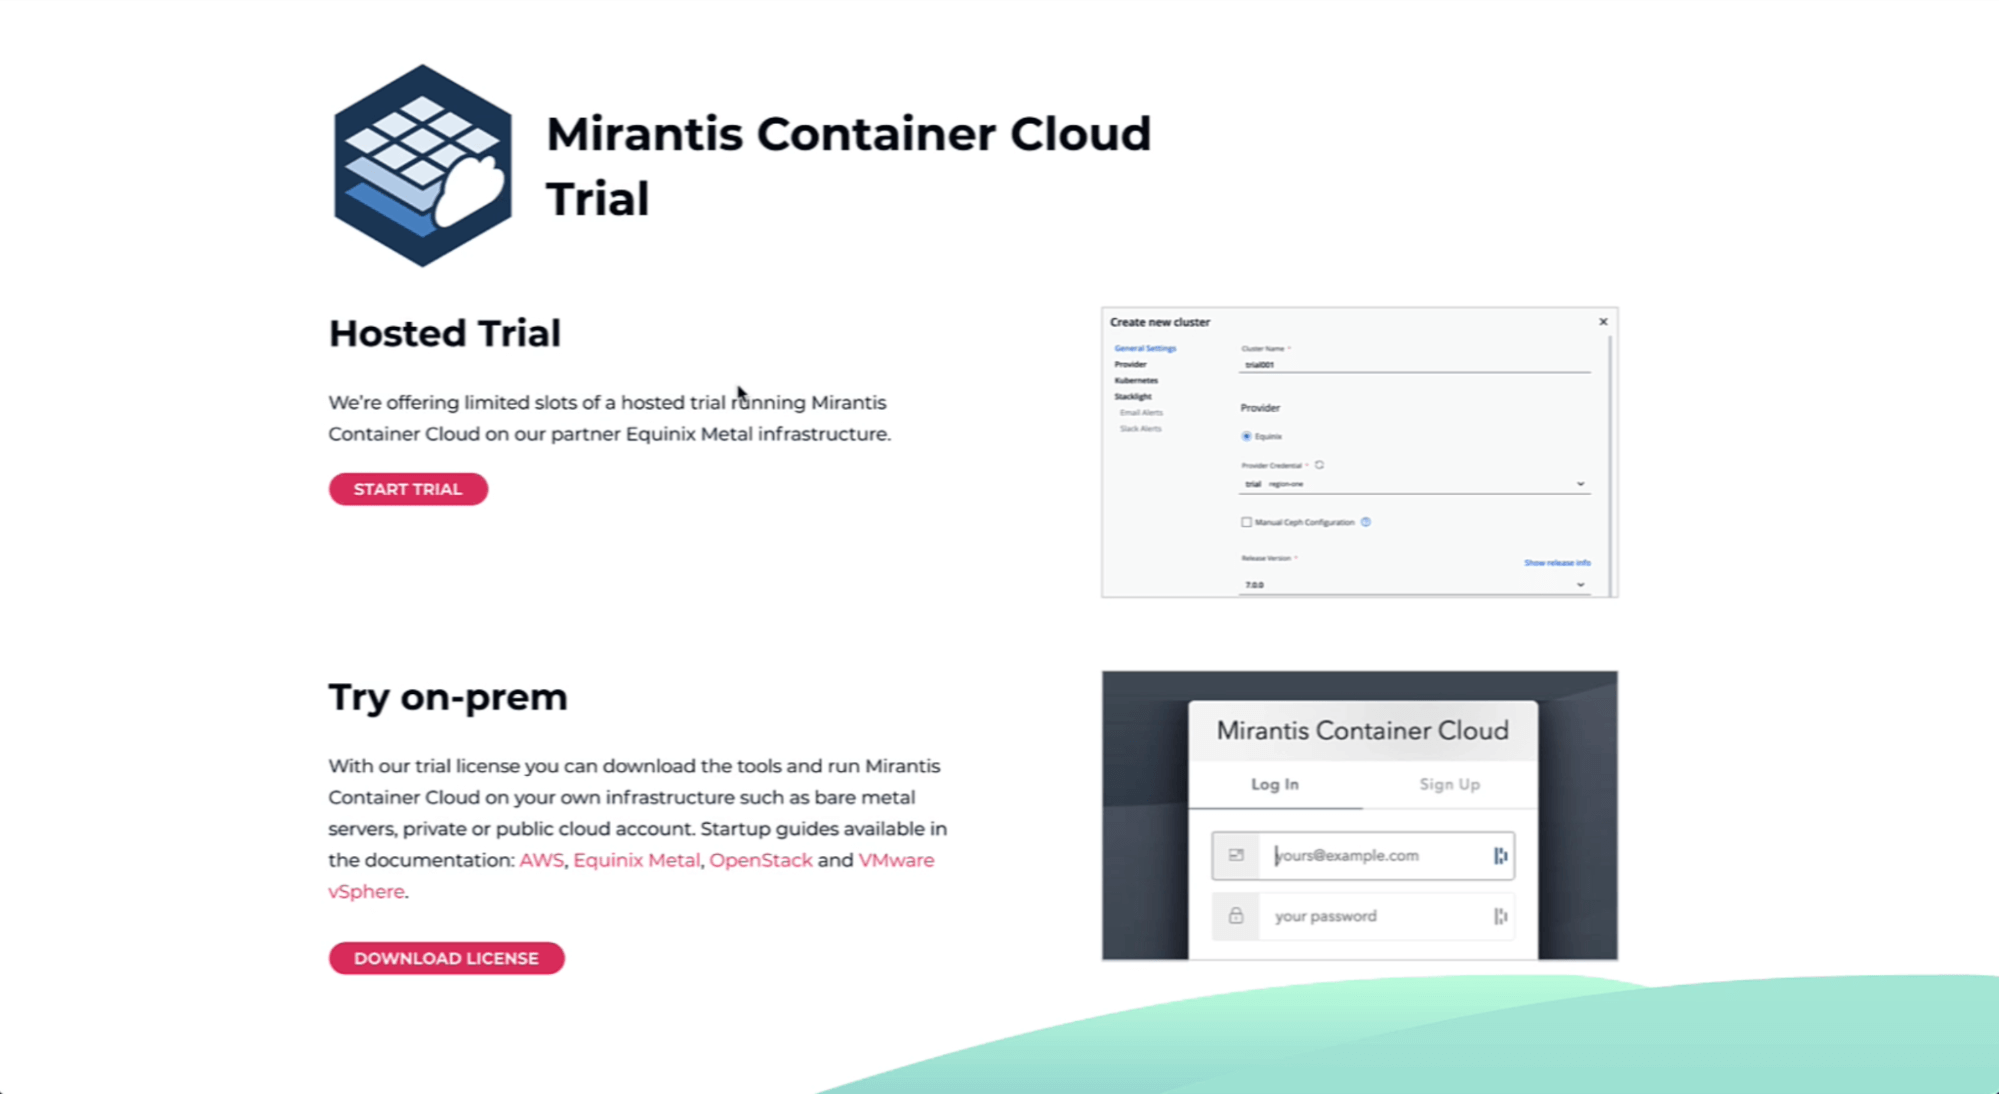 start trial page for mirantis container cloud hosted trial